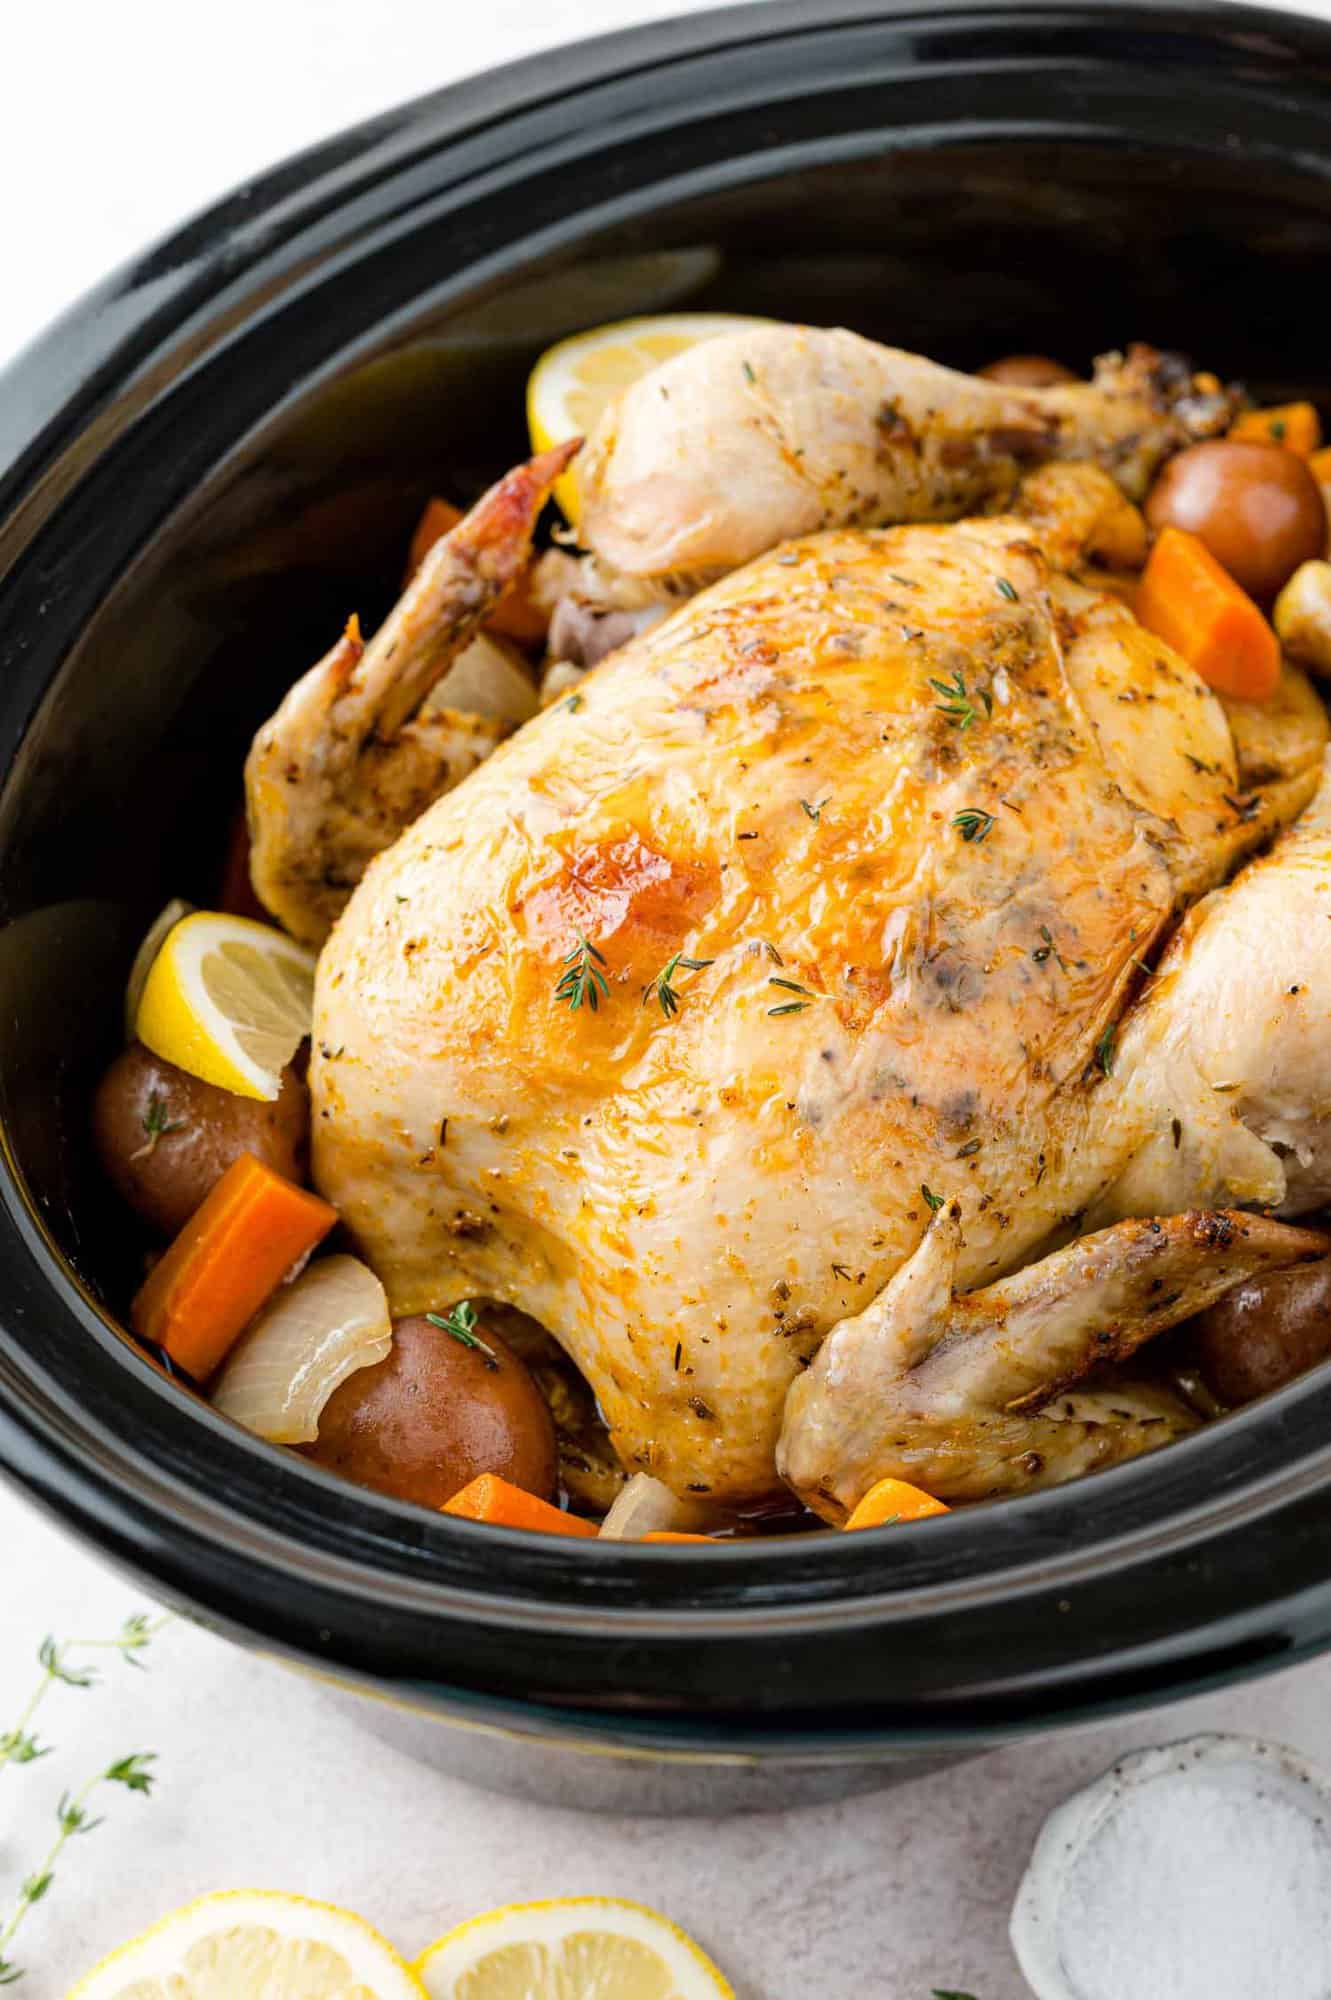 Whole chicken in a crockpot with vegetables and potatoes.